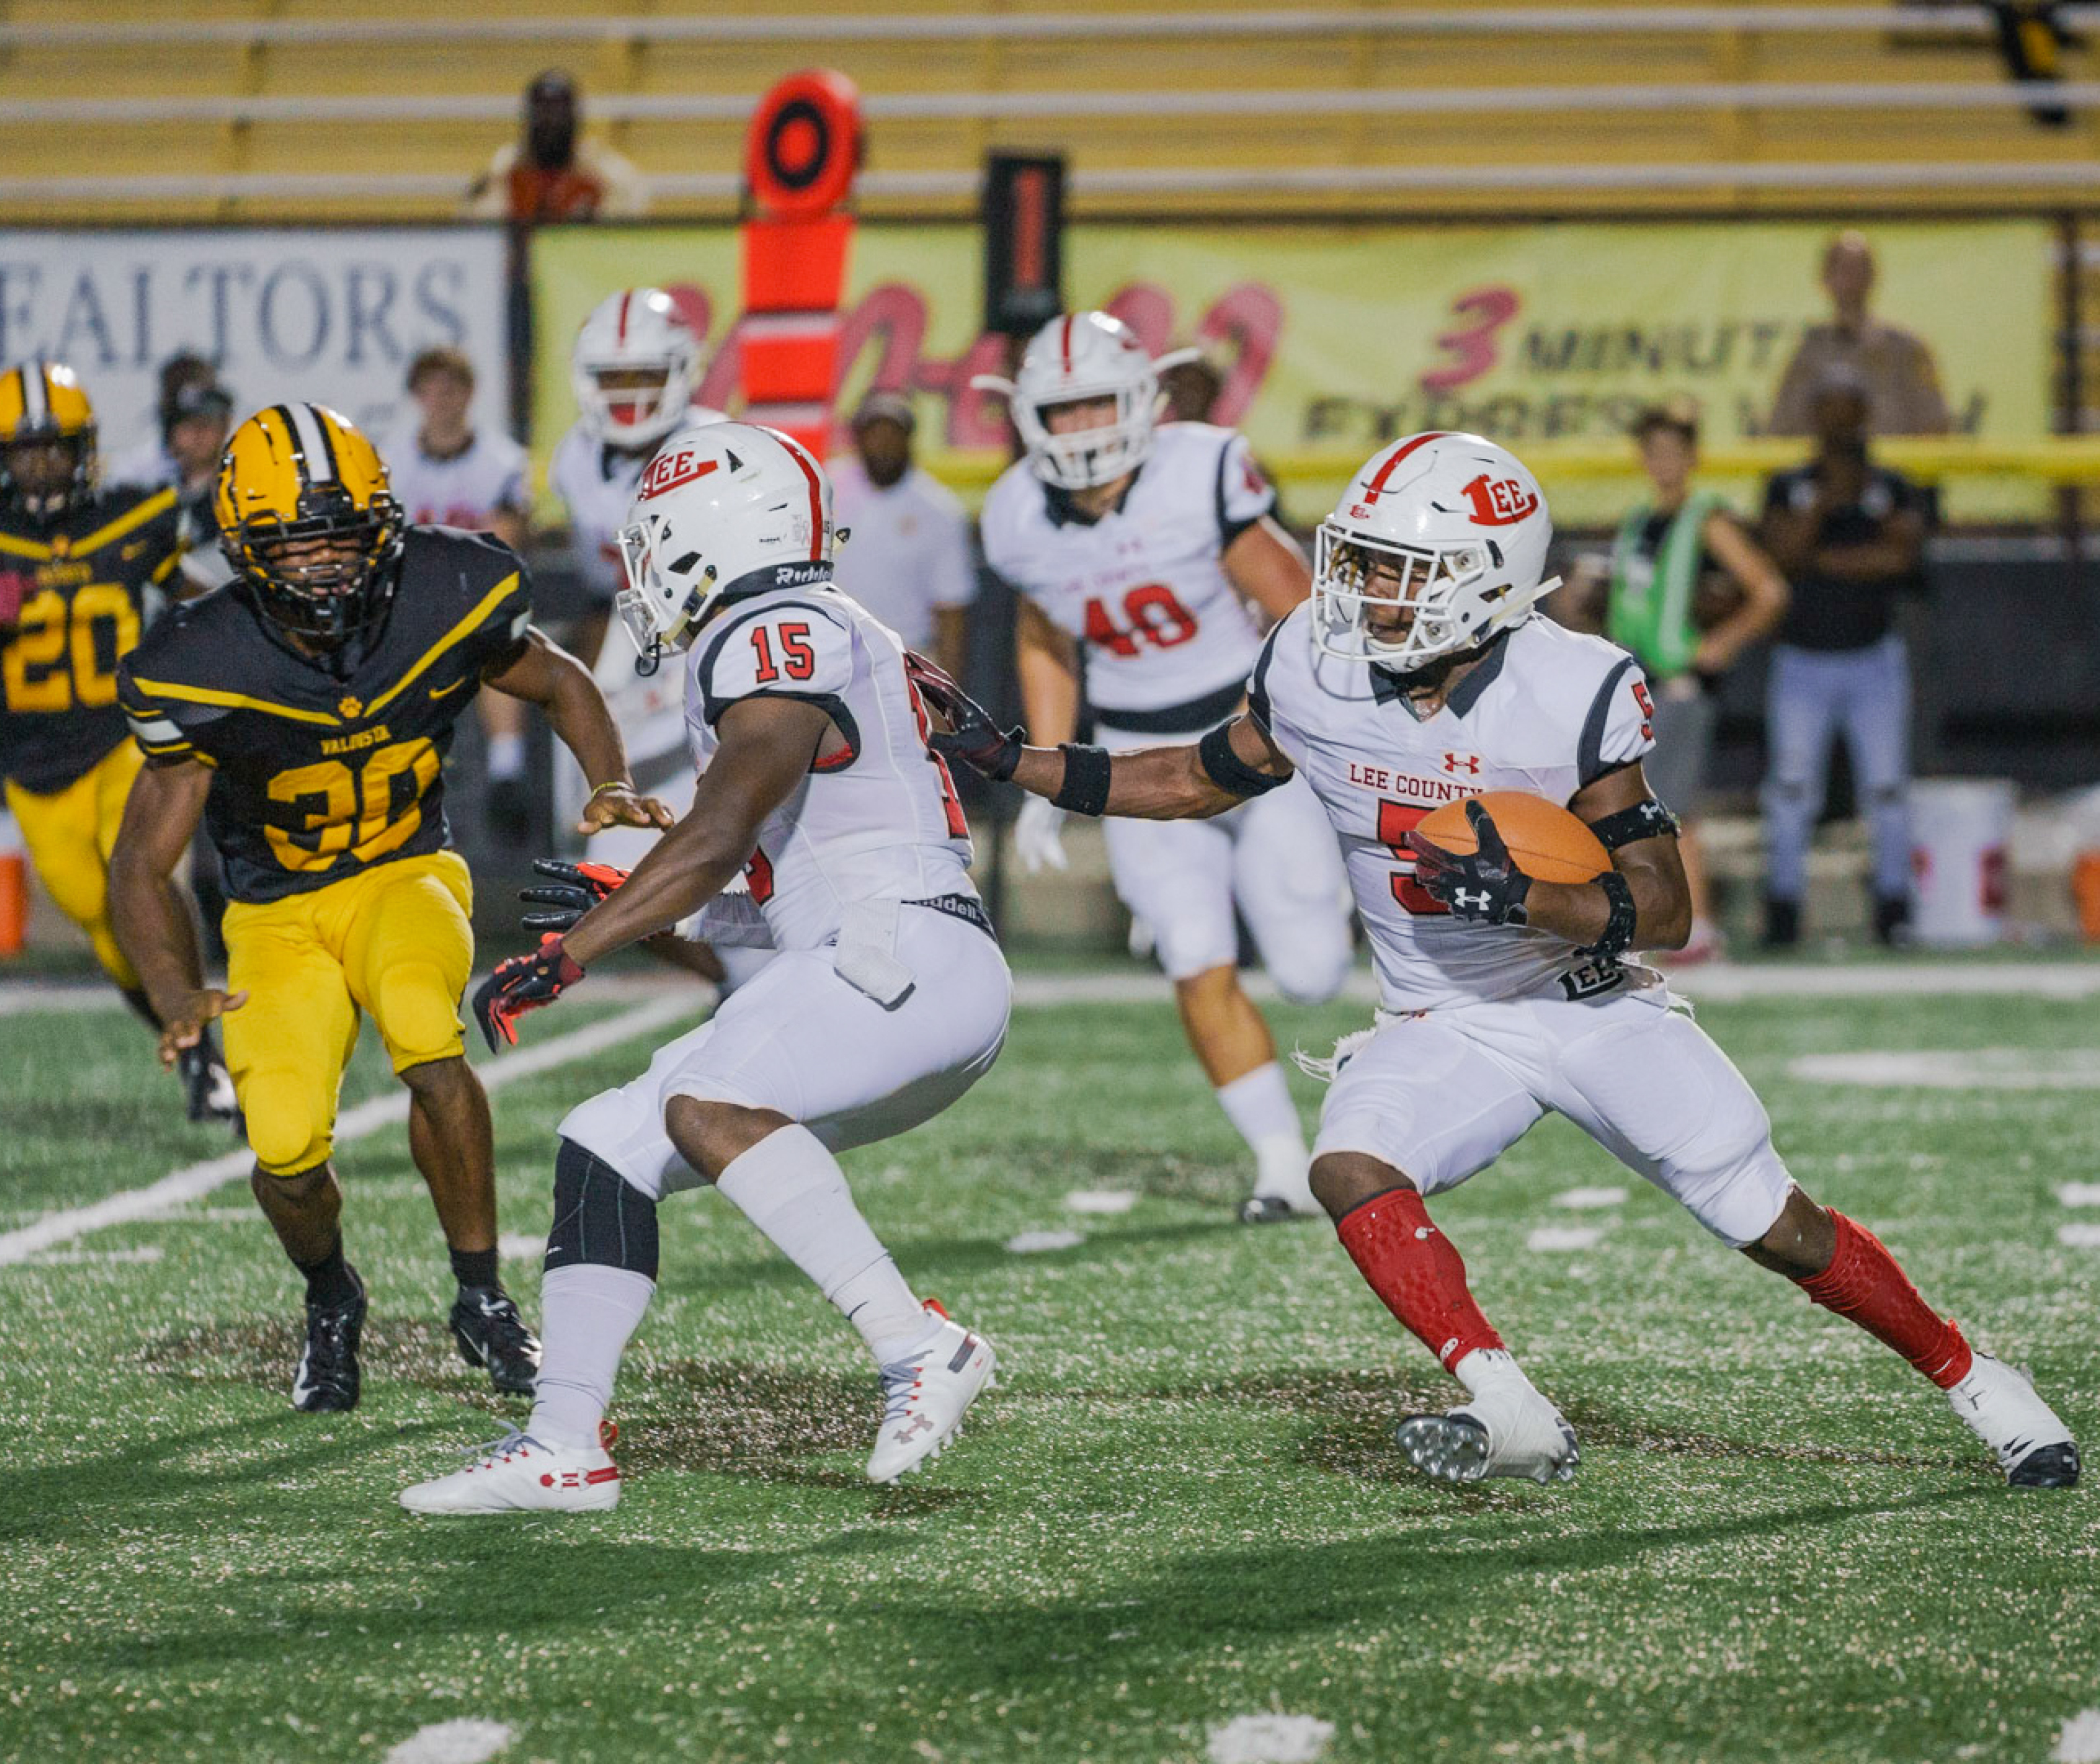 Lee County Football 2022 Team Preview - ITG Next